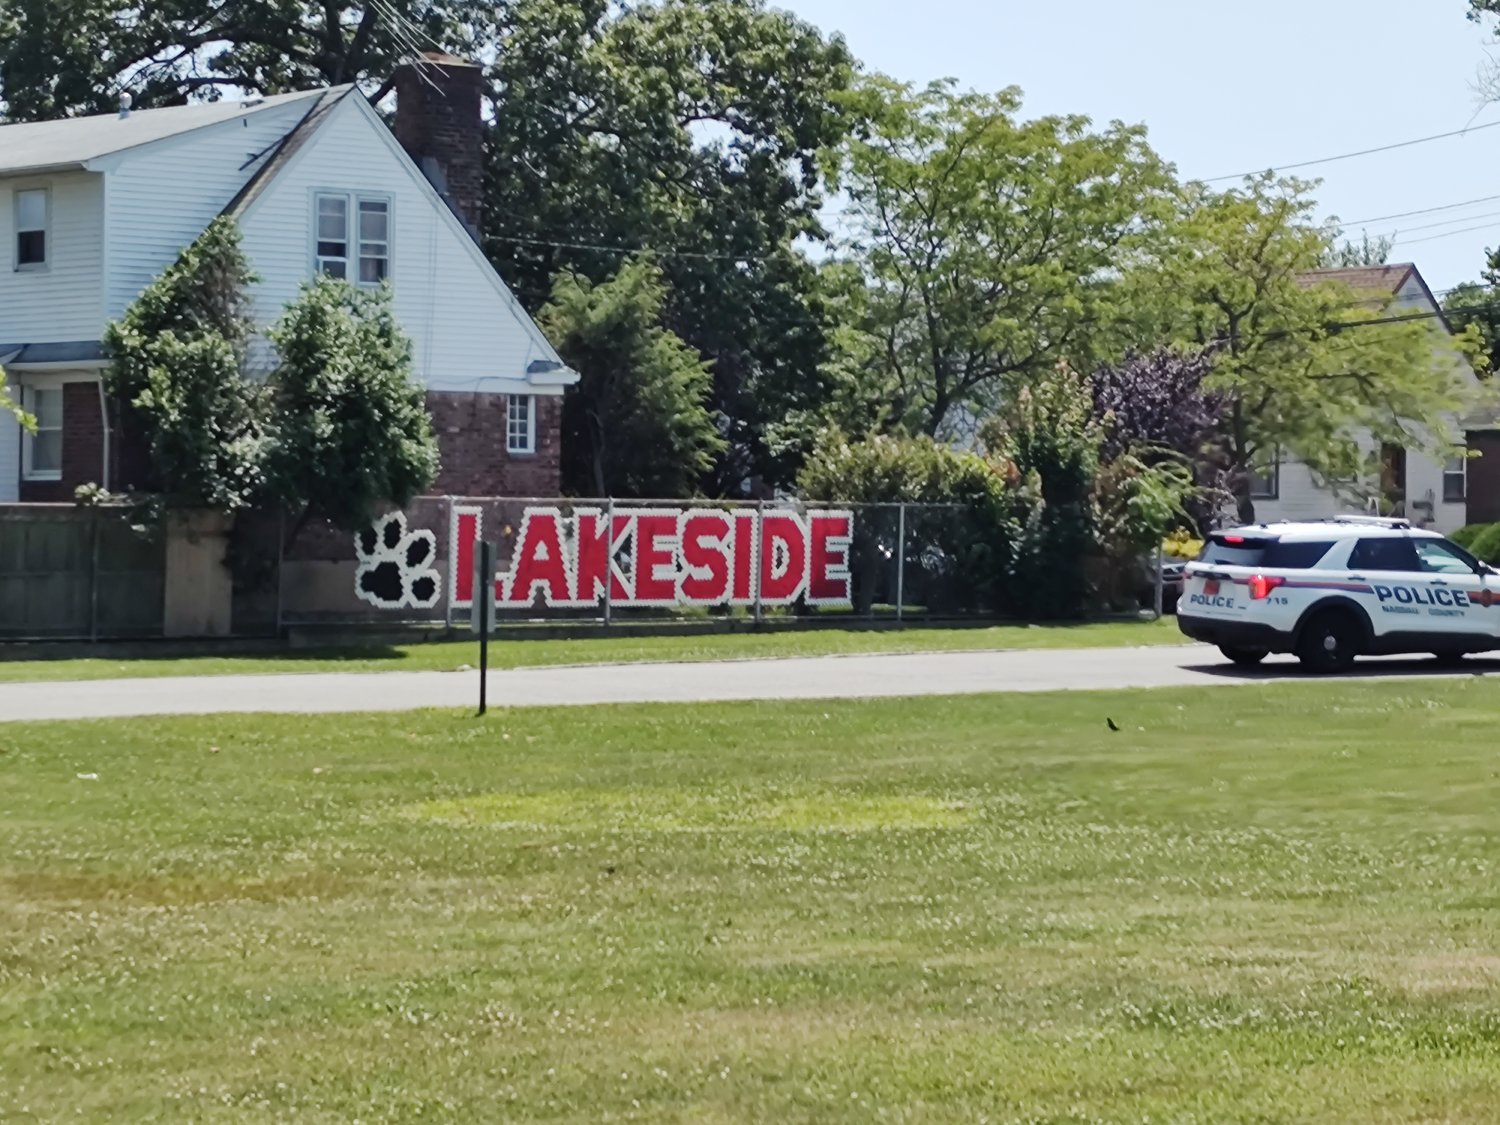 Explosive making devices were found outside of Levy Lakeside School in Merrick on June 24.